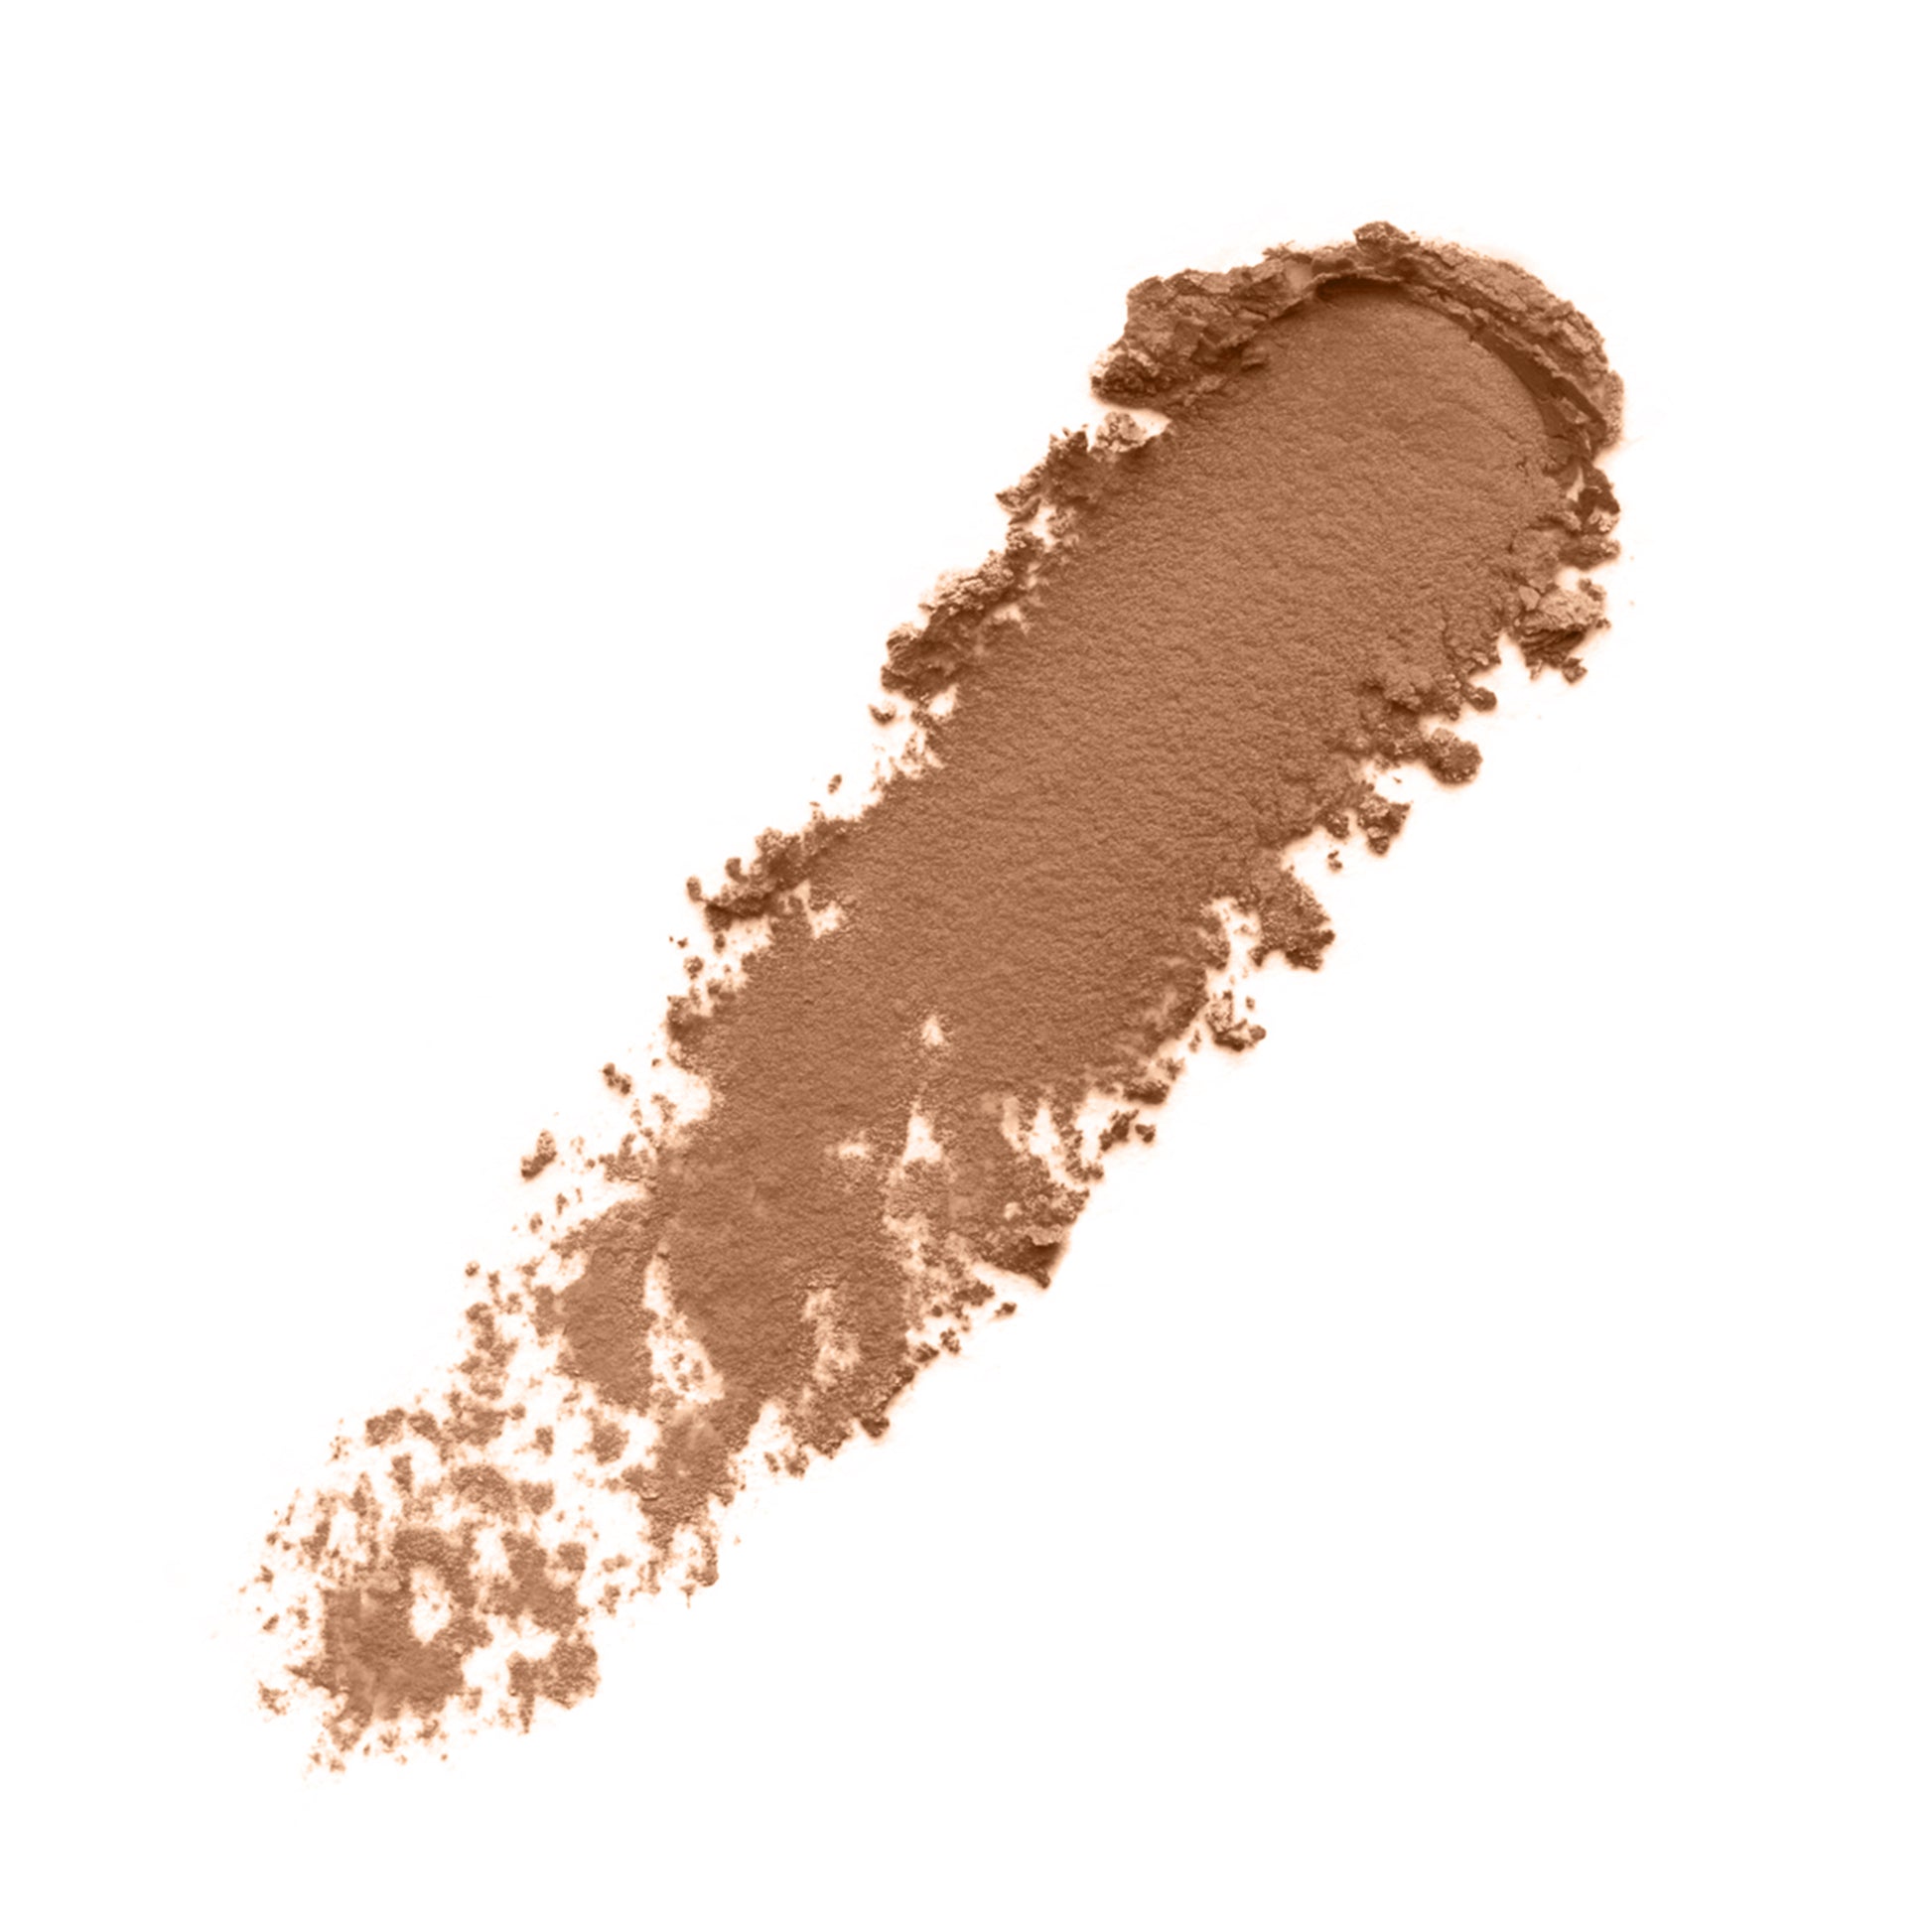 A swatch of a neutral toned powder bronzer on a white background.